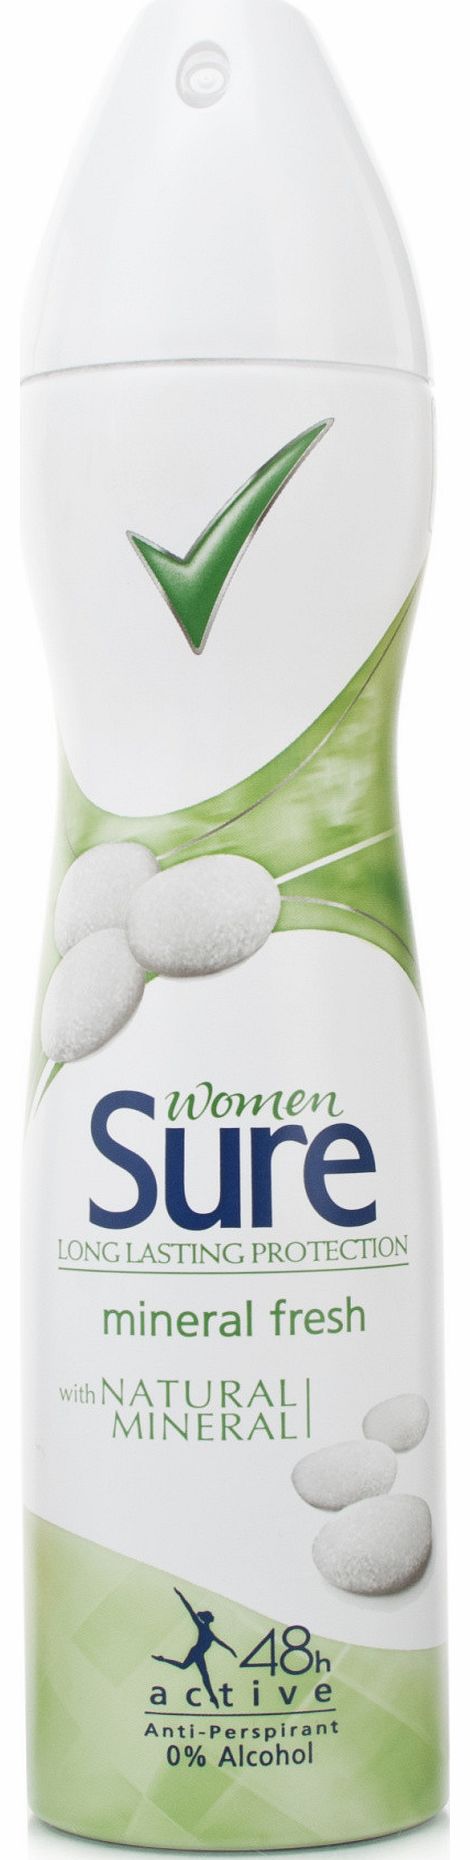 Women Mineral Fresh with Natural Minerals